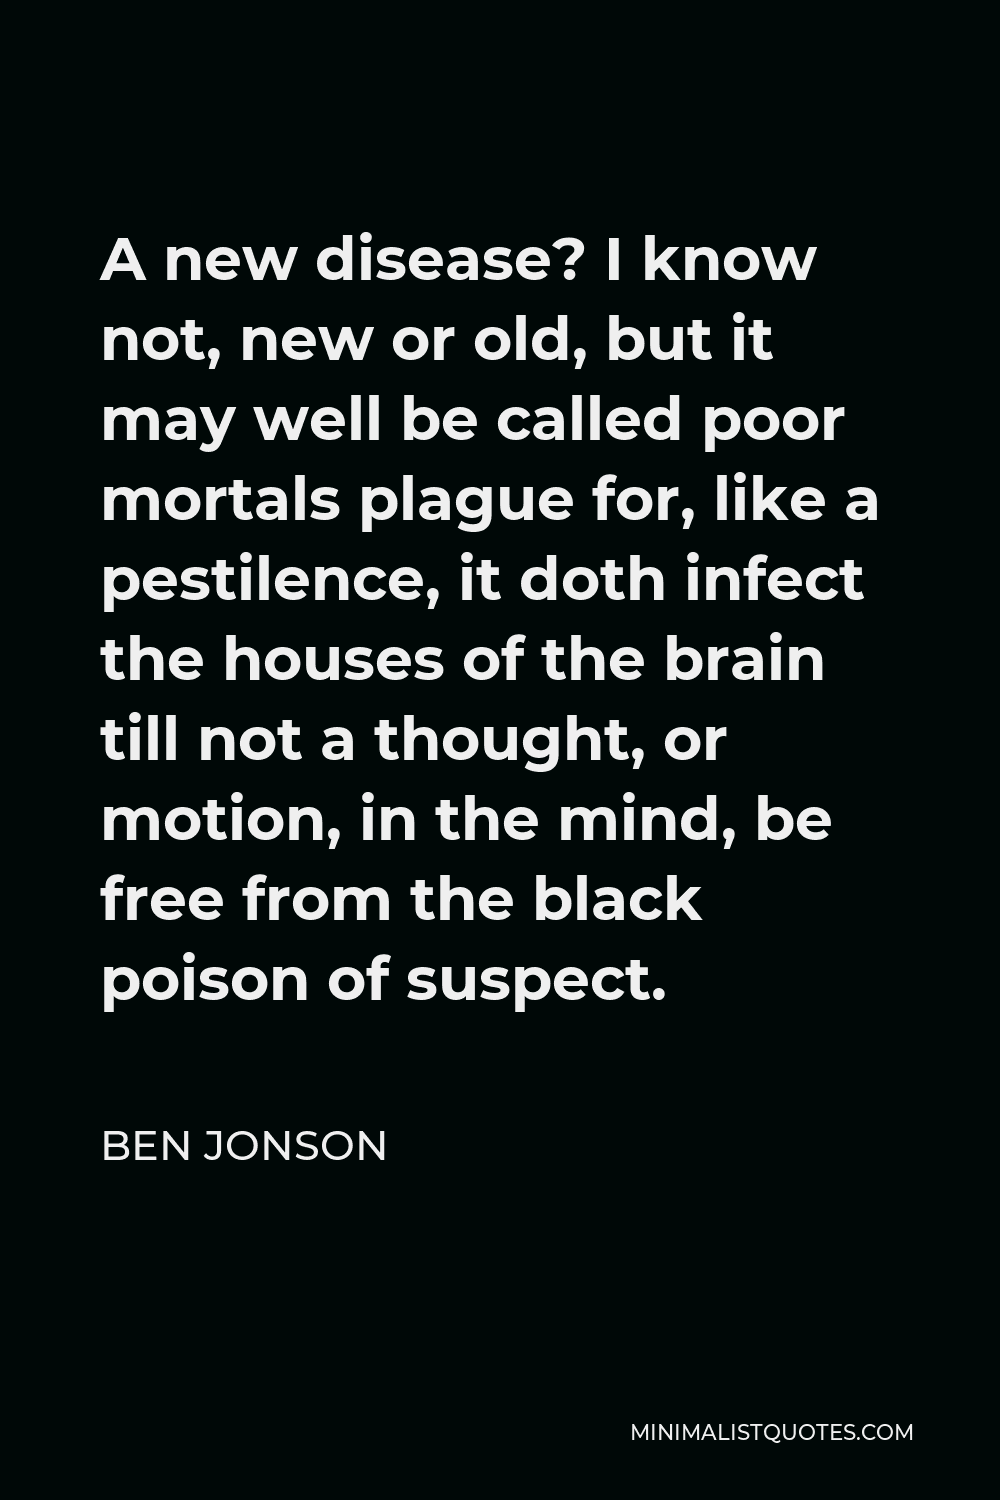 Ben Jonson Quote - A new disease? I know not, new or old, but it may well be called poor mortals plague for, like a pestilence, it doth infect the houses of the brain till not a thought, or motion, in the mind, be free from the black poison of suspect.